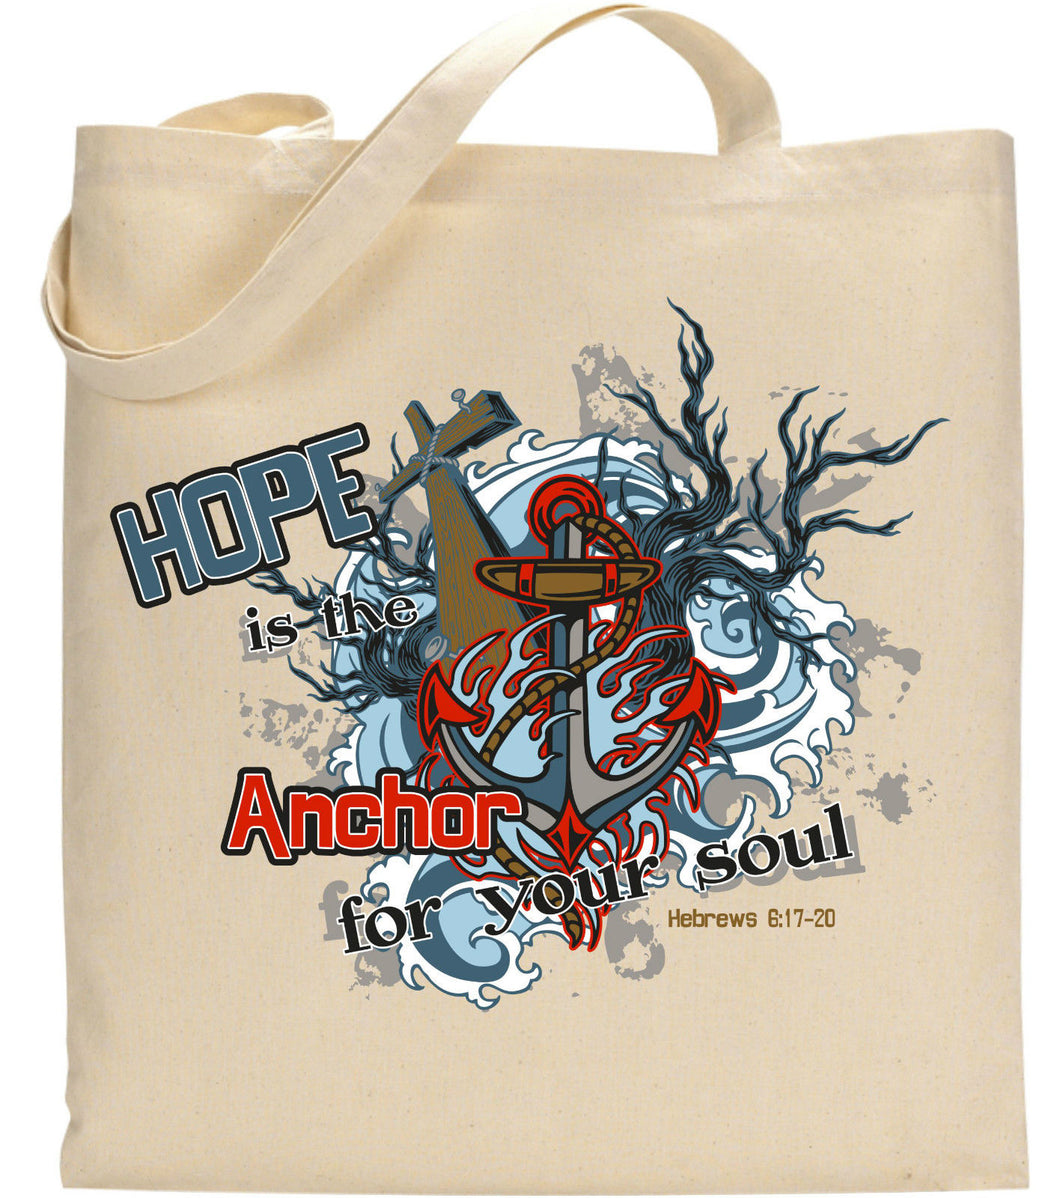 Hope Is The Anchor For Your Soul Hebrew 6:17-20 Christian Tote